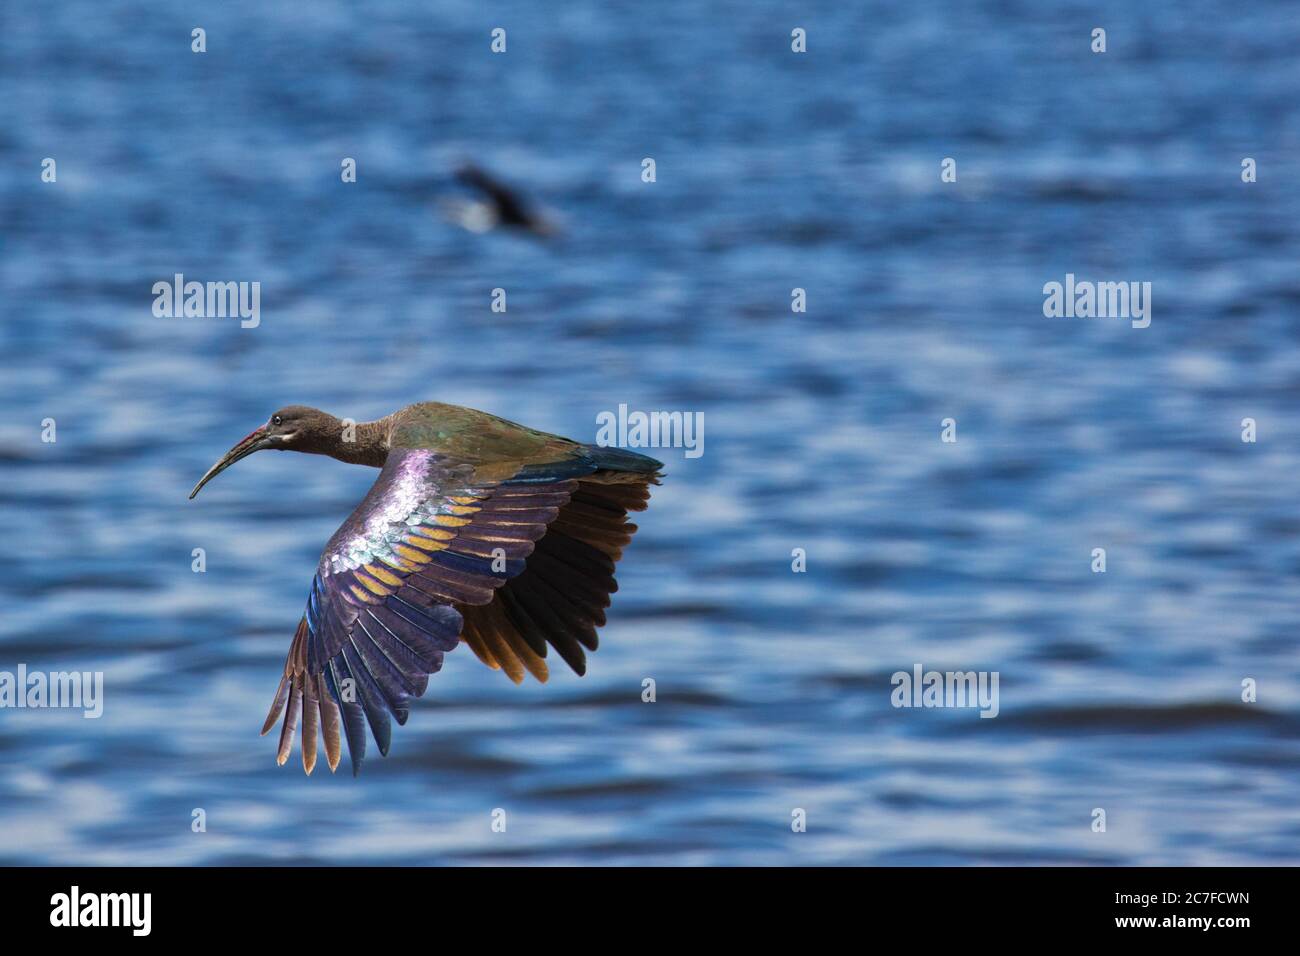 Hadeda ibis (Bostrychia hagedash) in flight. This is a wading bird with long legs, a long neck and a long bill for feeding on insects, crustaceans, sp Stock Photo